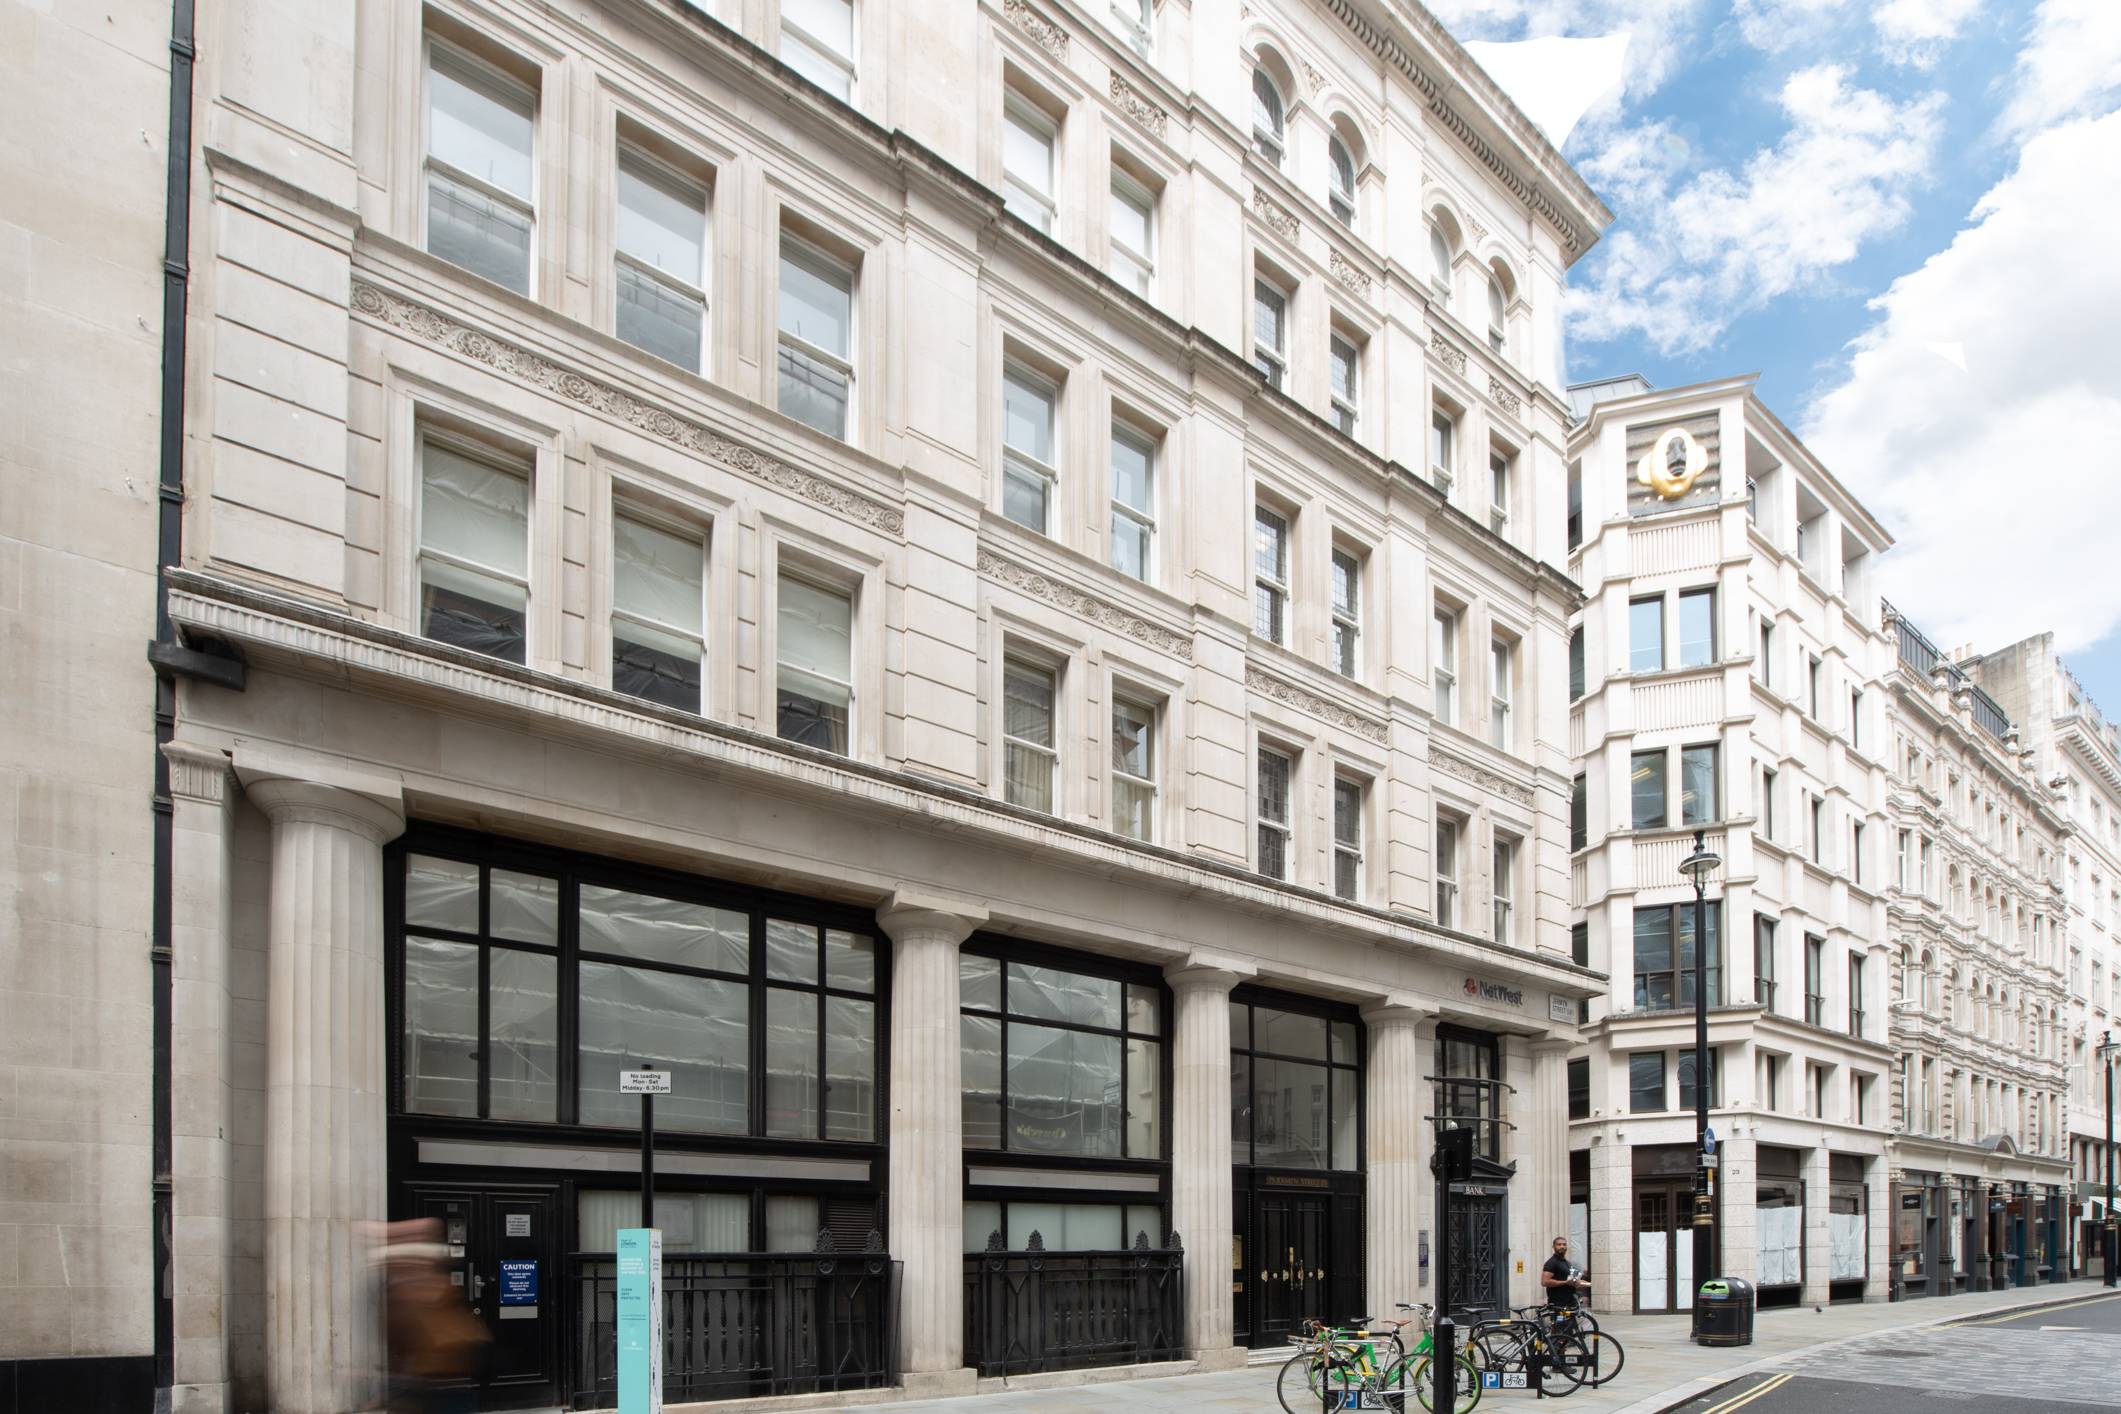 A modern one-bedroom apartment on Jermyn Street in the heart of St. James's. Located on the first floor of a Grade II* listed building, a refurbished and stylish apartment allowing a generous amount of natural light with high ceilings.